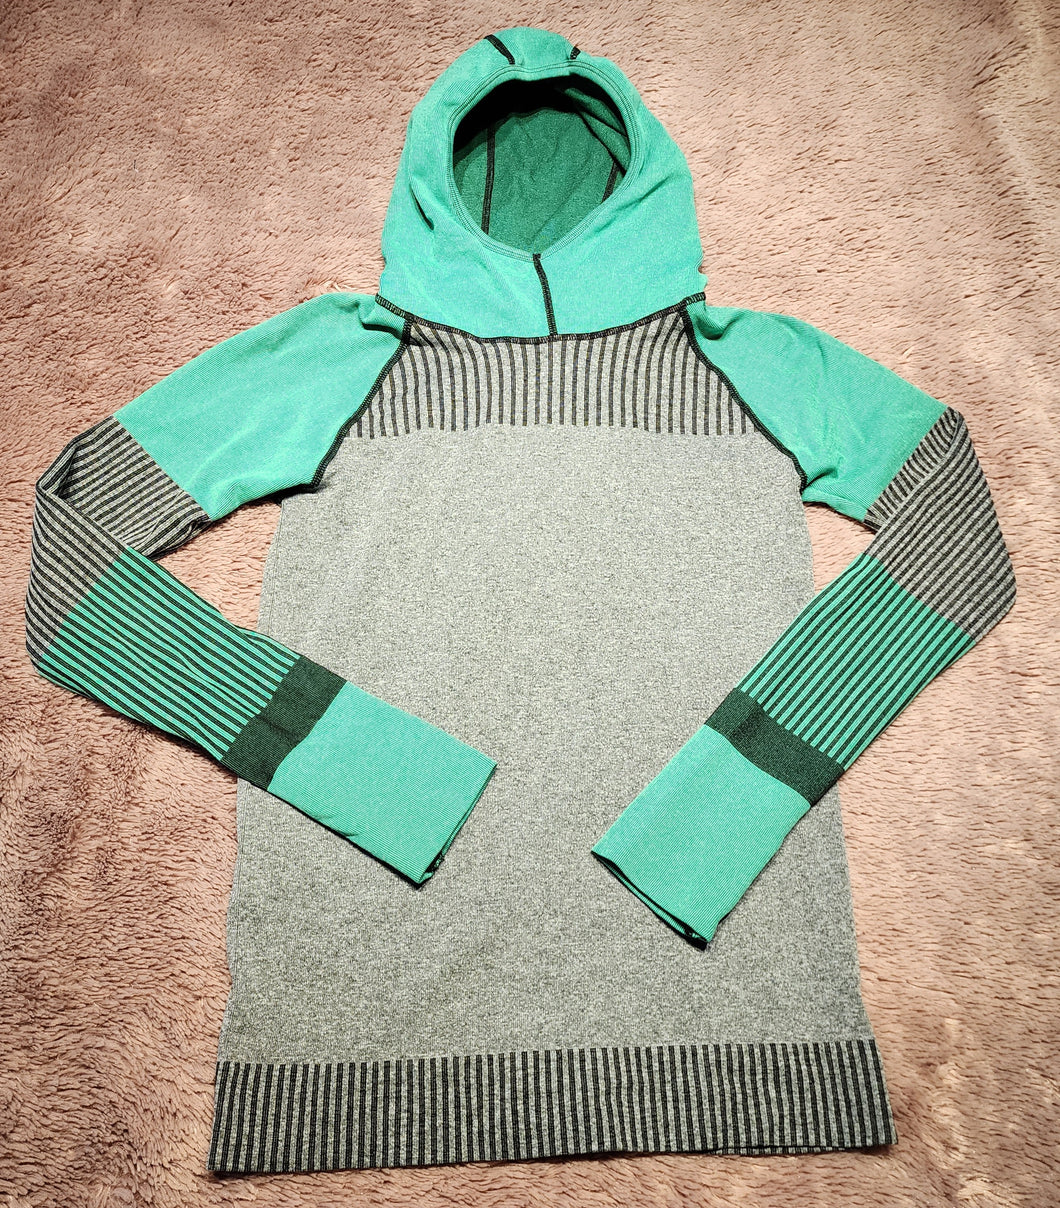 Gap Fit Motion long sleeve hoodie shirt, size XS, gray and green with black stripes Adult XS